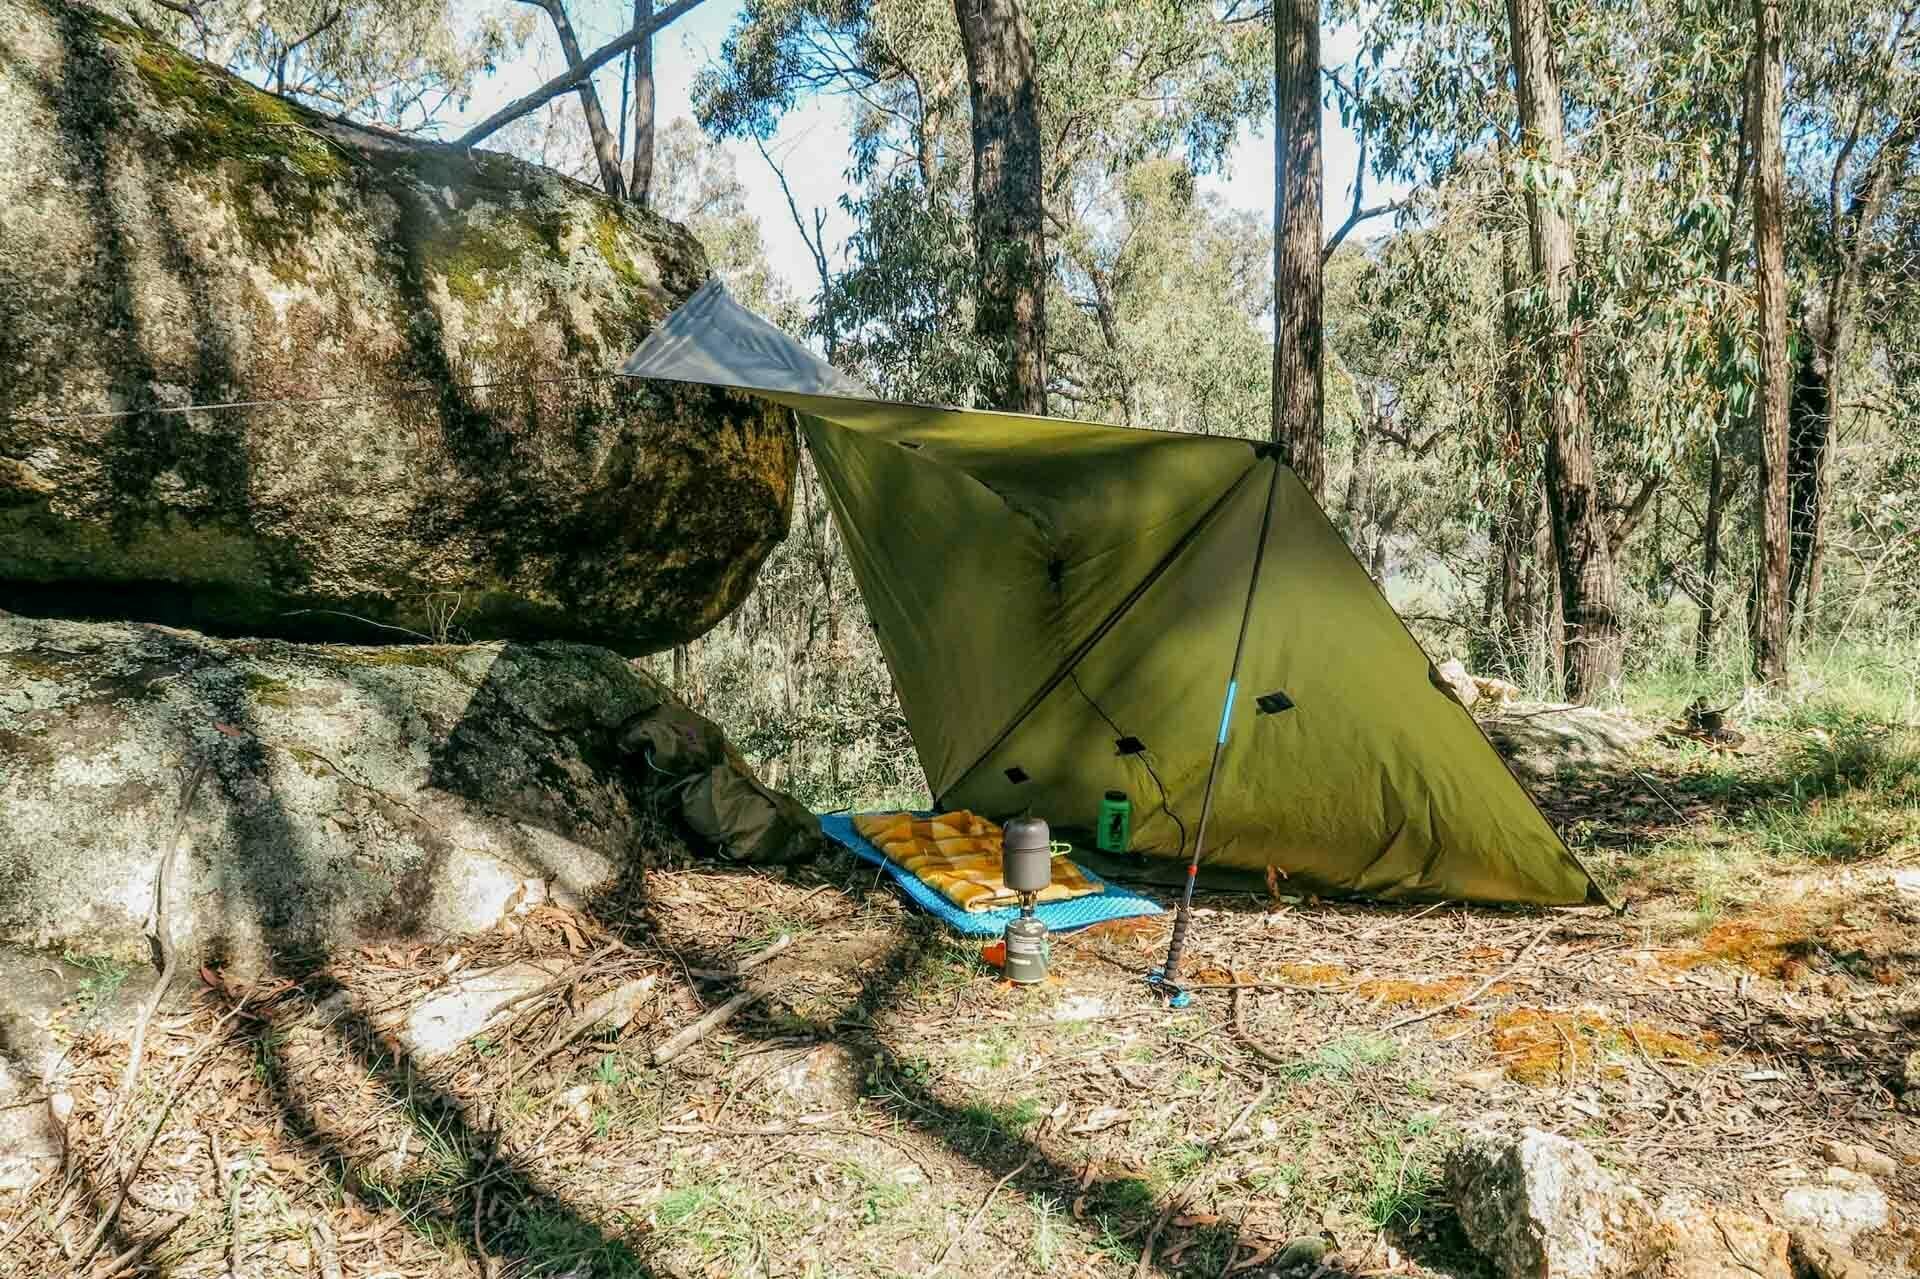 How To Camp Under a Tarp, kale munro, tarp camping, shelter, lean-to